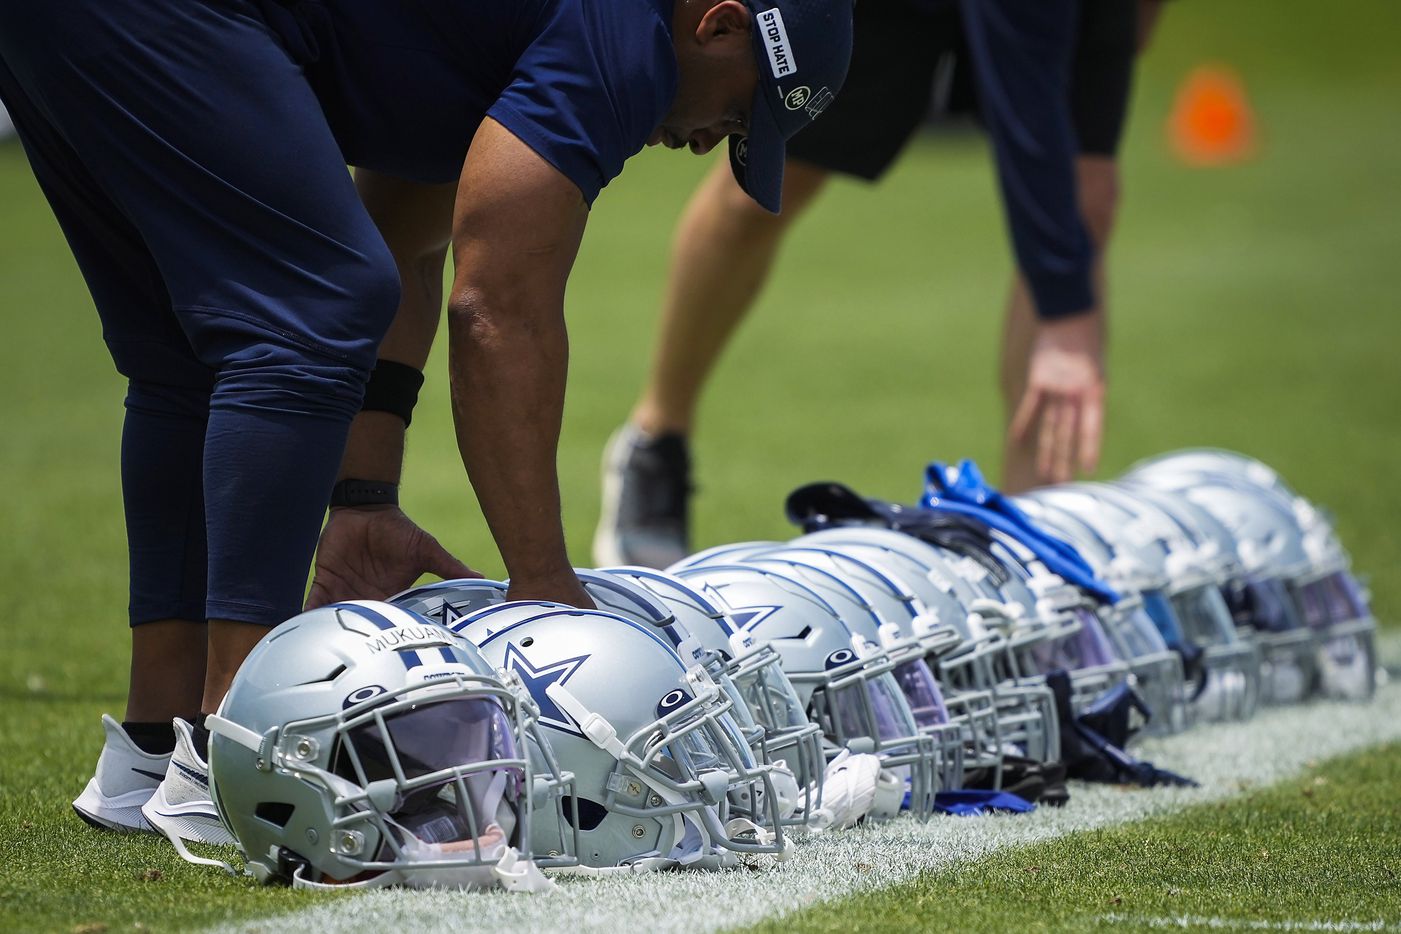 Dallas Cowboys staff line up defensive players helmets on the sideline during a minicamp practice at The Star on Tuesday, June 8, 2021, in Frisco. (Smiley N. Pool/The Dallas Morning News)